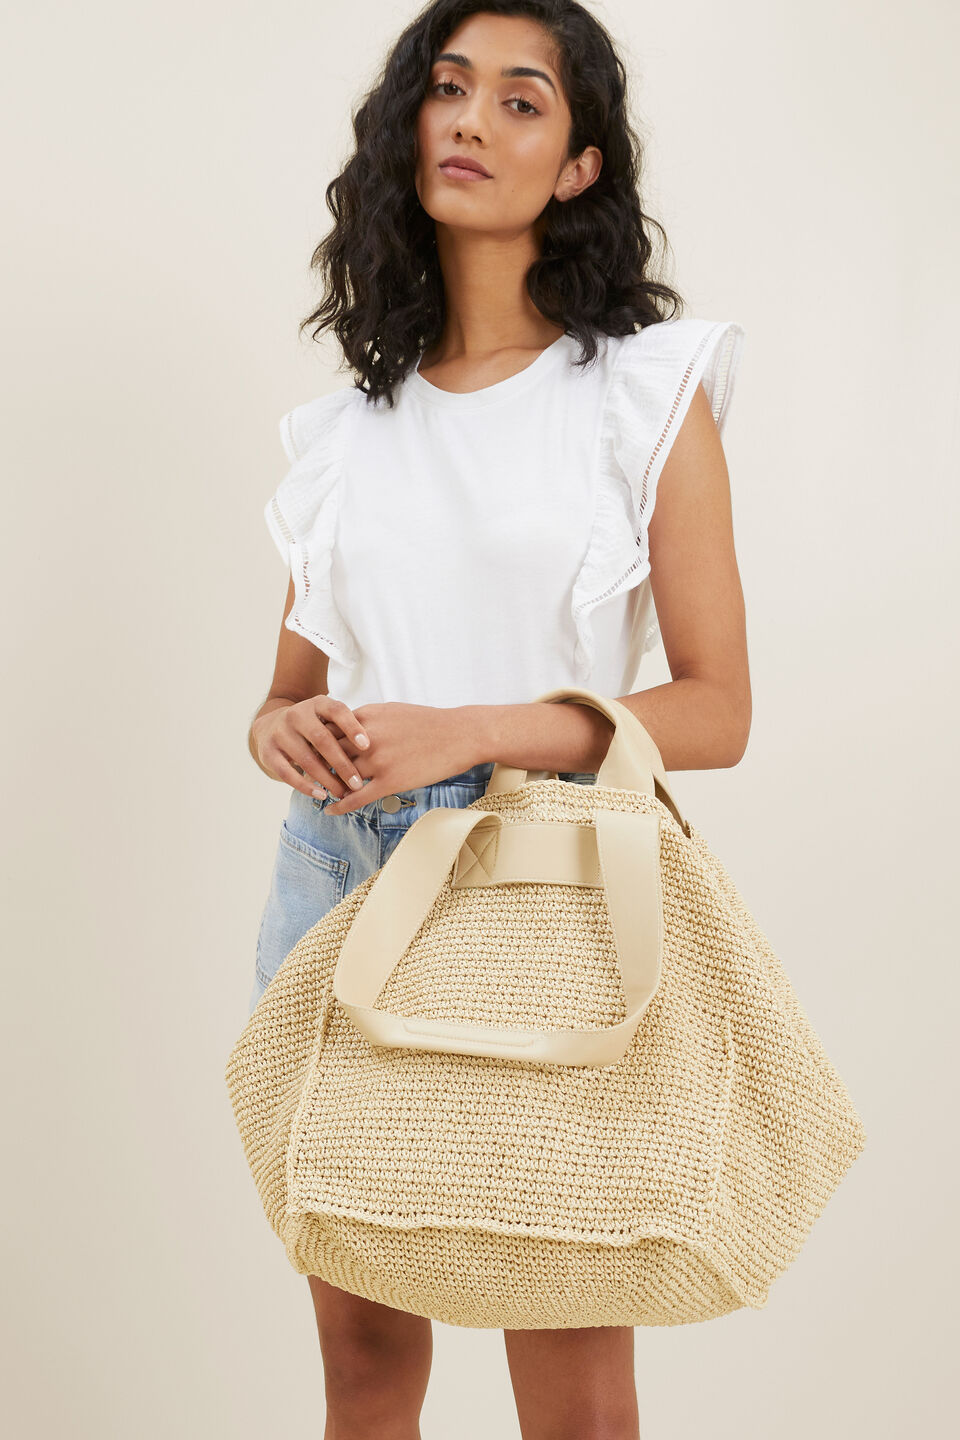 Straw Carry All Tote  Natural